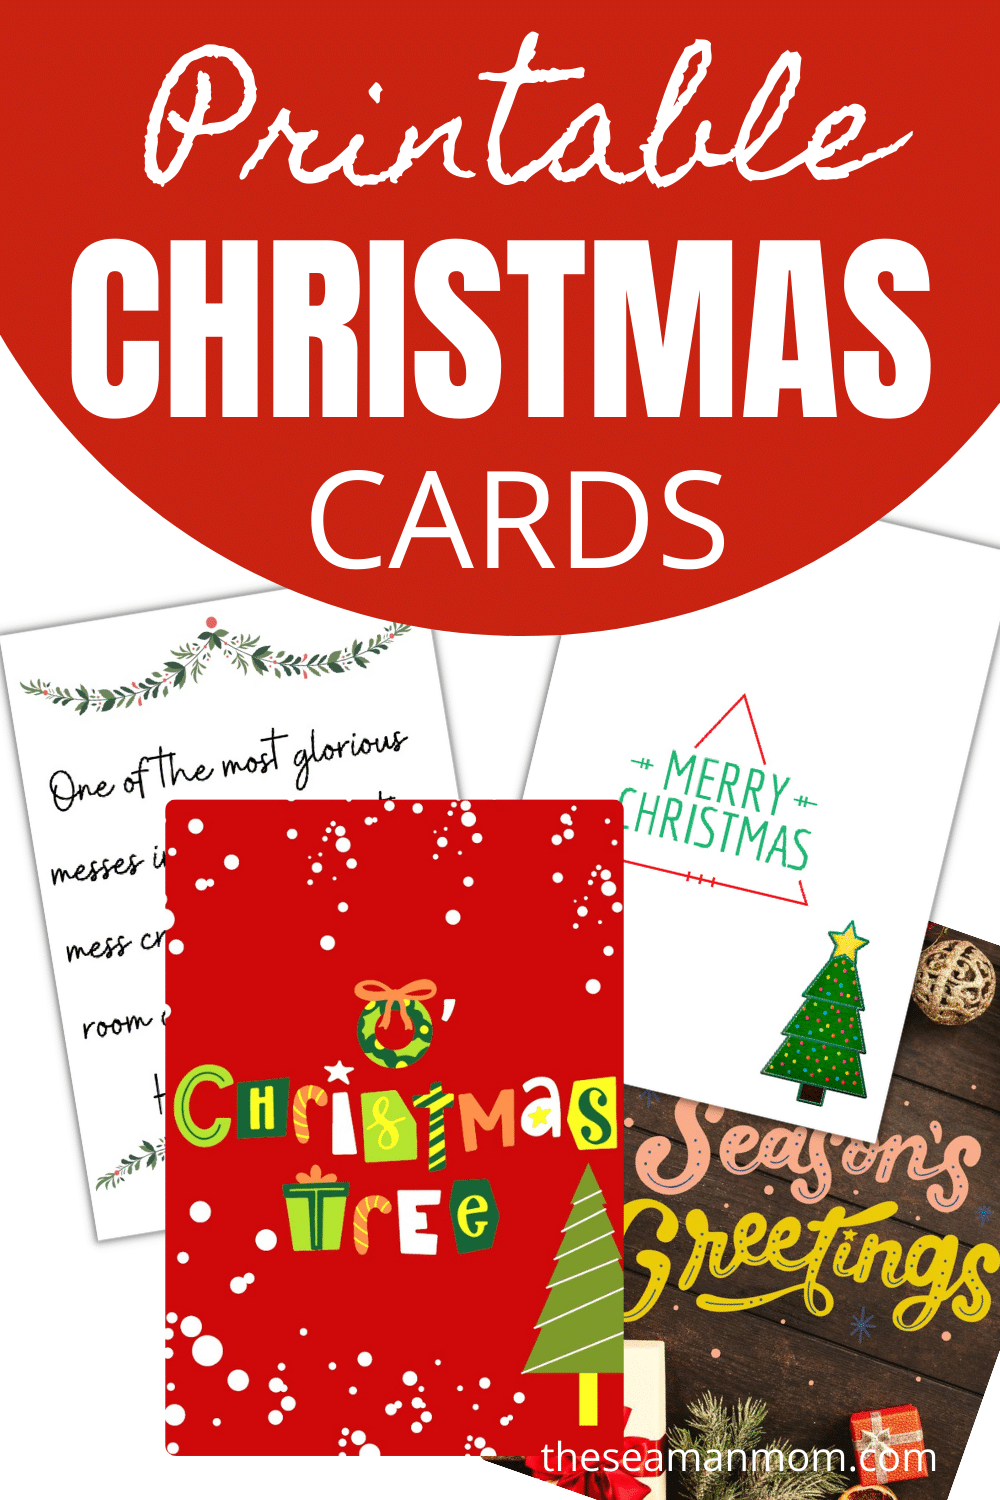 Want to make your own Christmas cards but don’t have time to have them professionally printed? Here are the easy steps on how to print your own Christmas cards. via @petroneagu